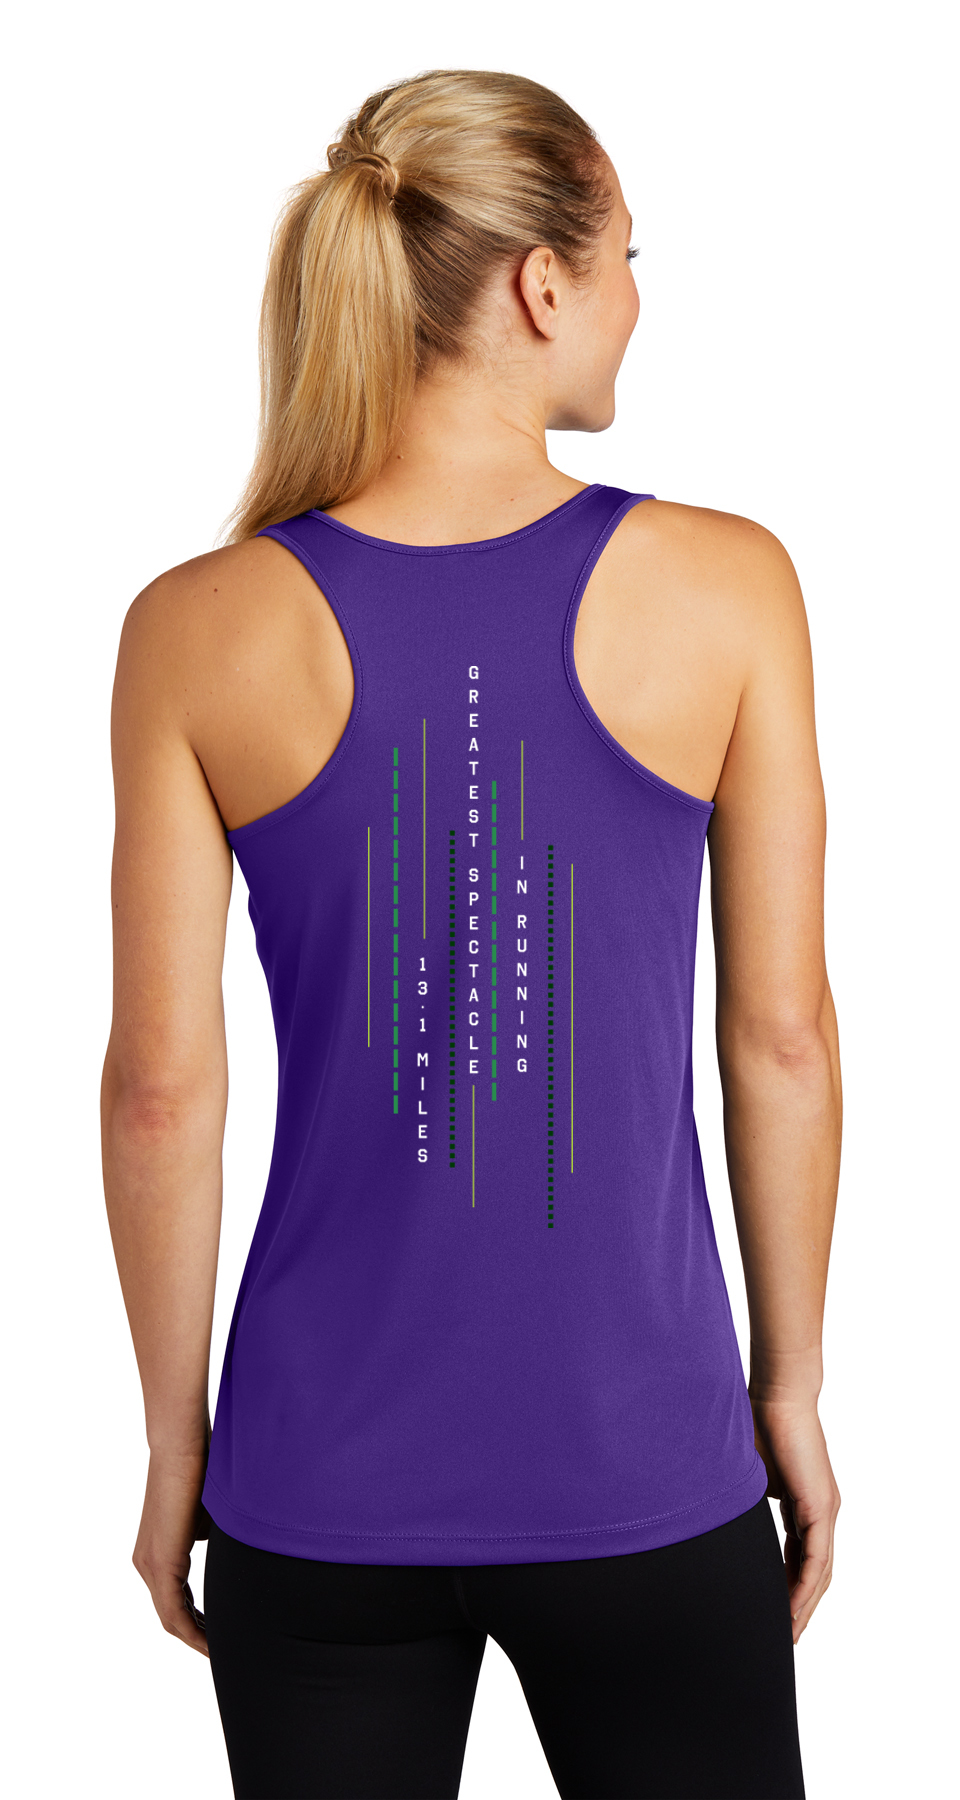 WOMEN’S PERFORMANCE INDY MINI GREATEST SPECTACLE TANK